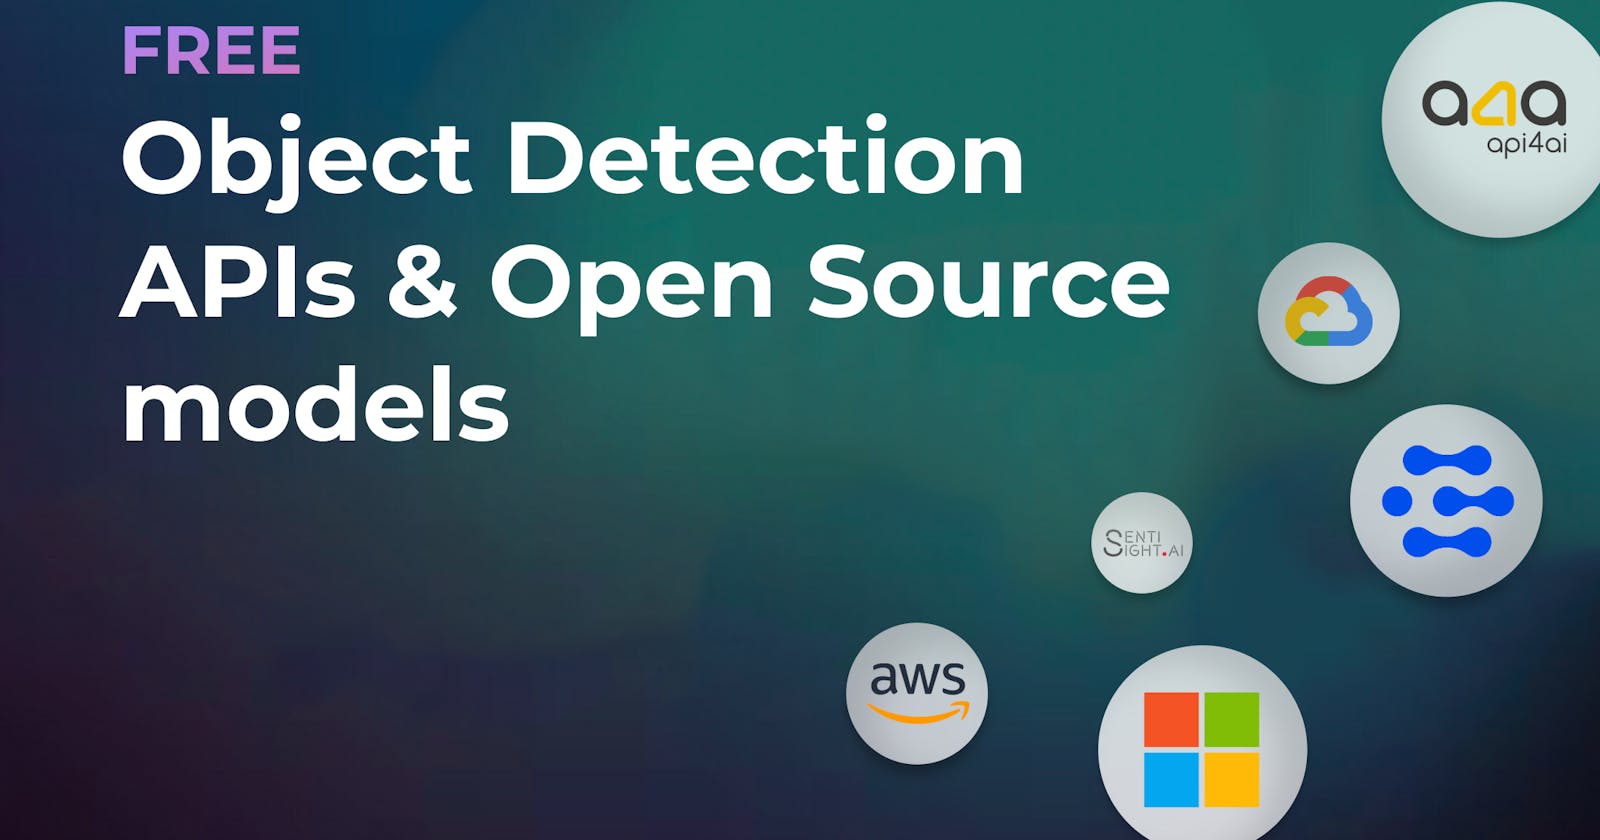 Top Free Image Object Detection tools, APIs, and Open Source models